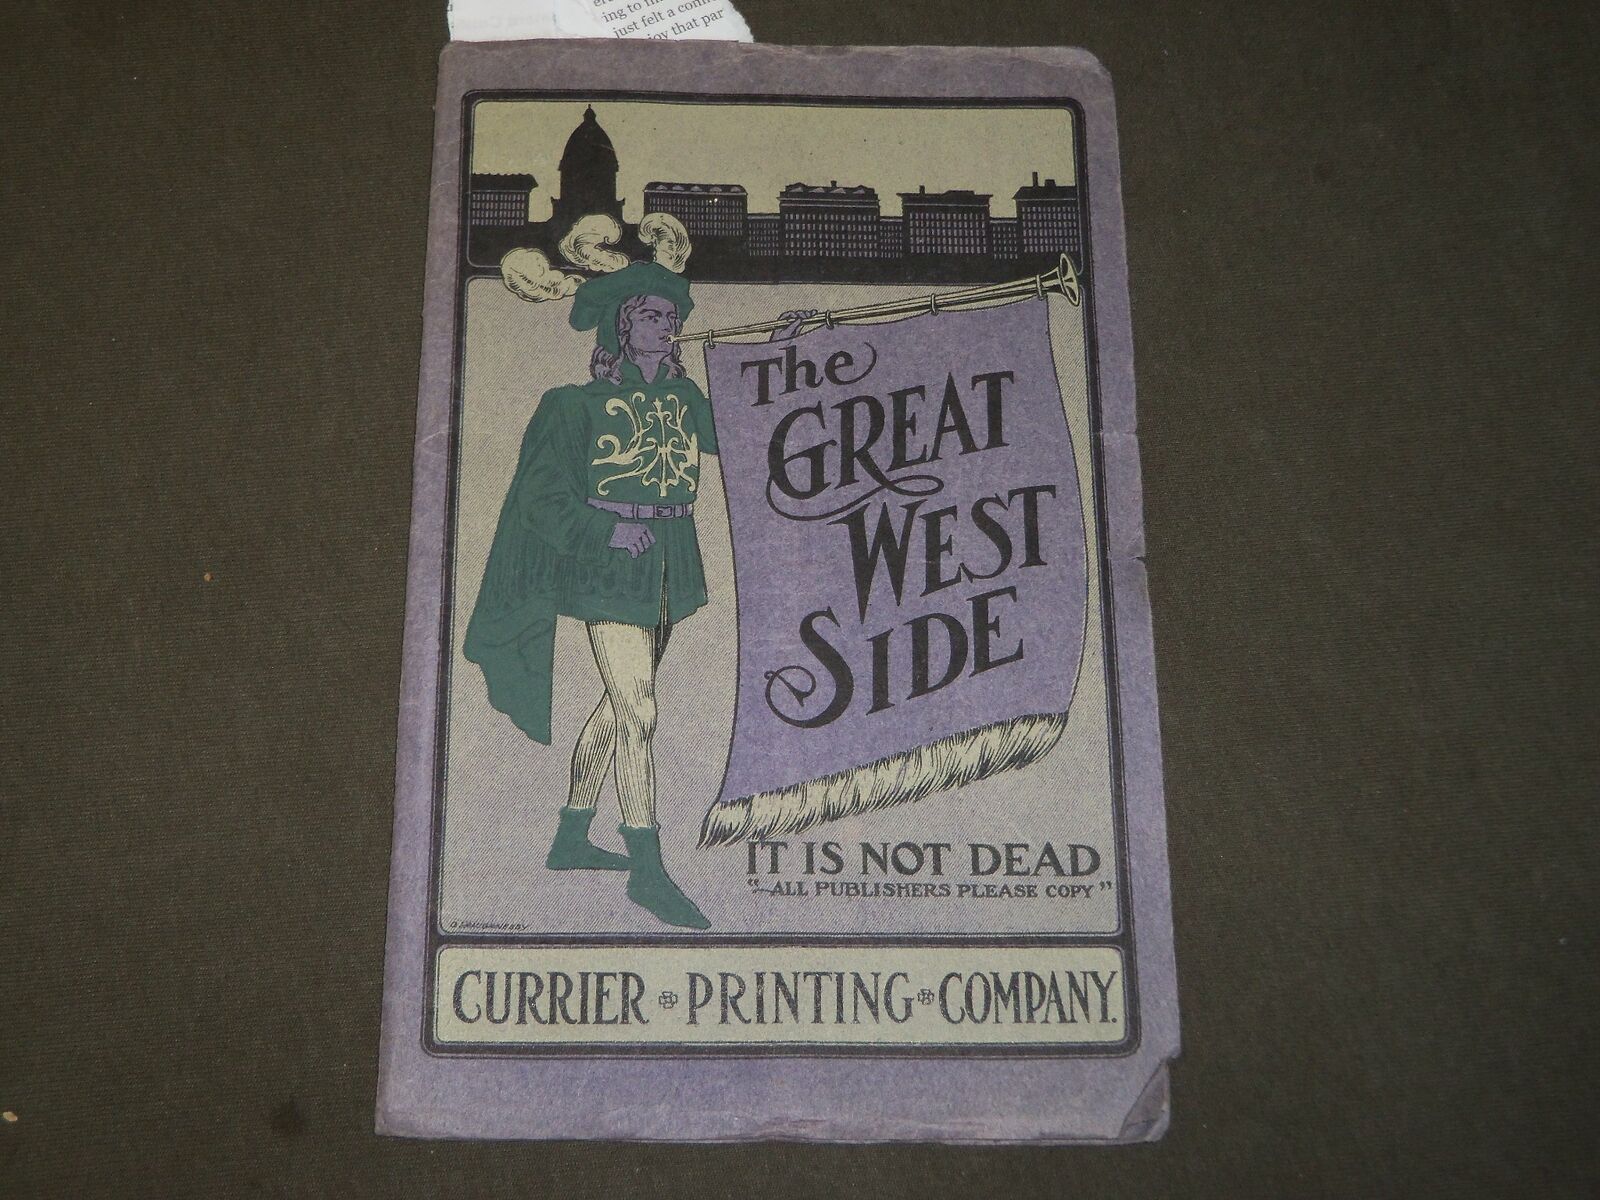 1909 THE GREAT WEST SIDE PROGRAM - CURRIER PRINTING COMPANY - CHICAGO - J 3708